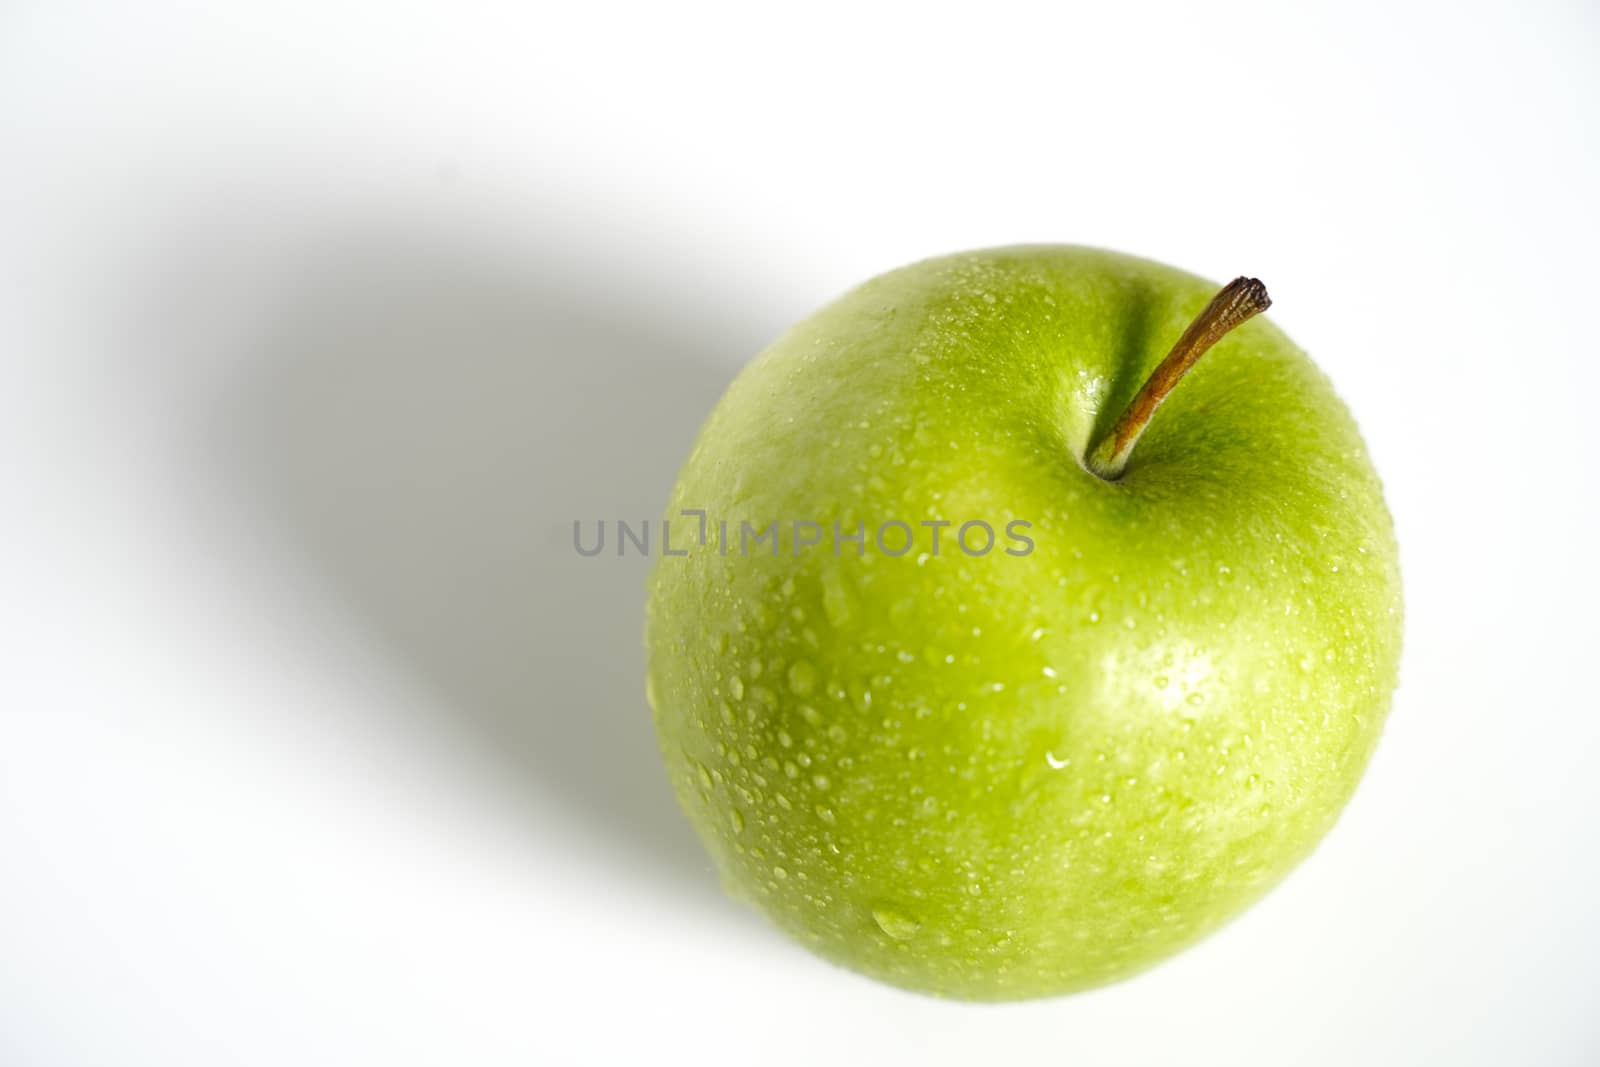 A Granny Smith Green Apple by samULvisuals